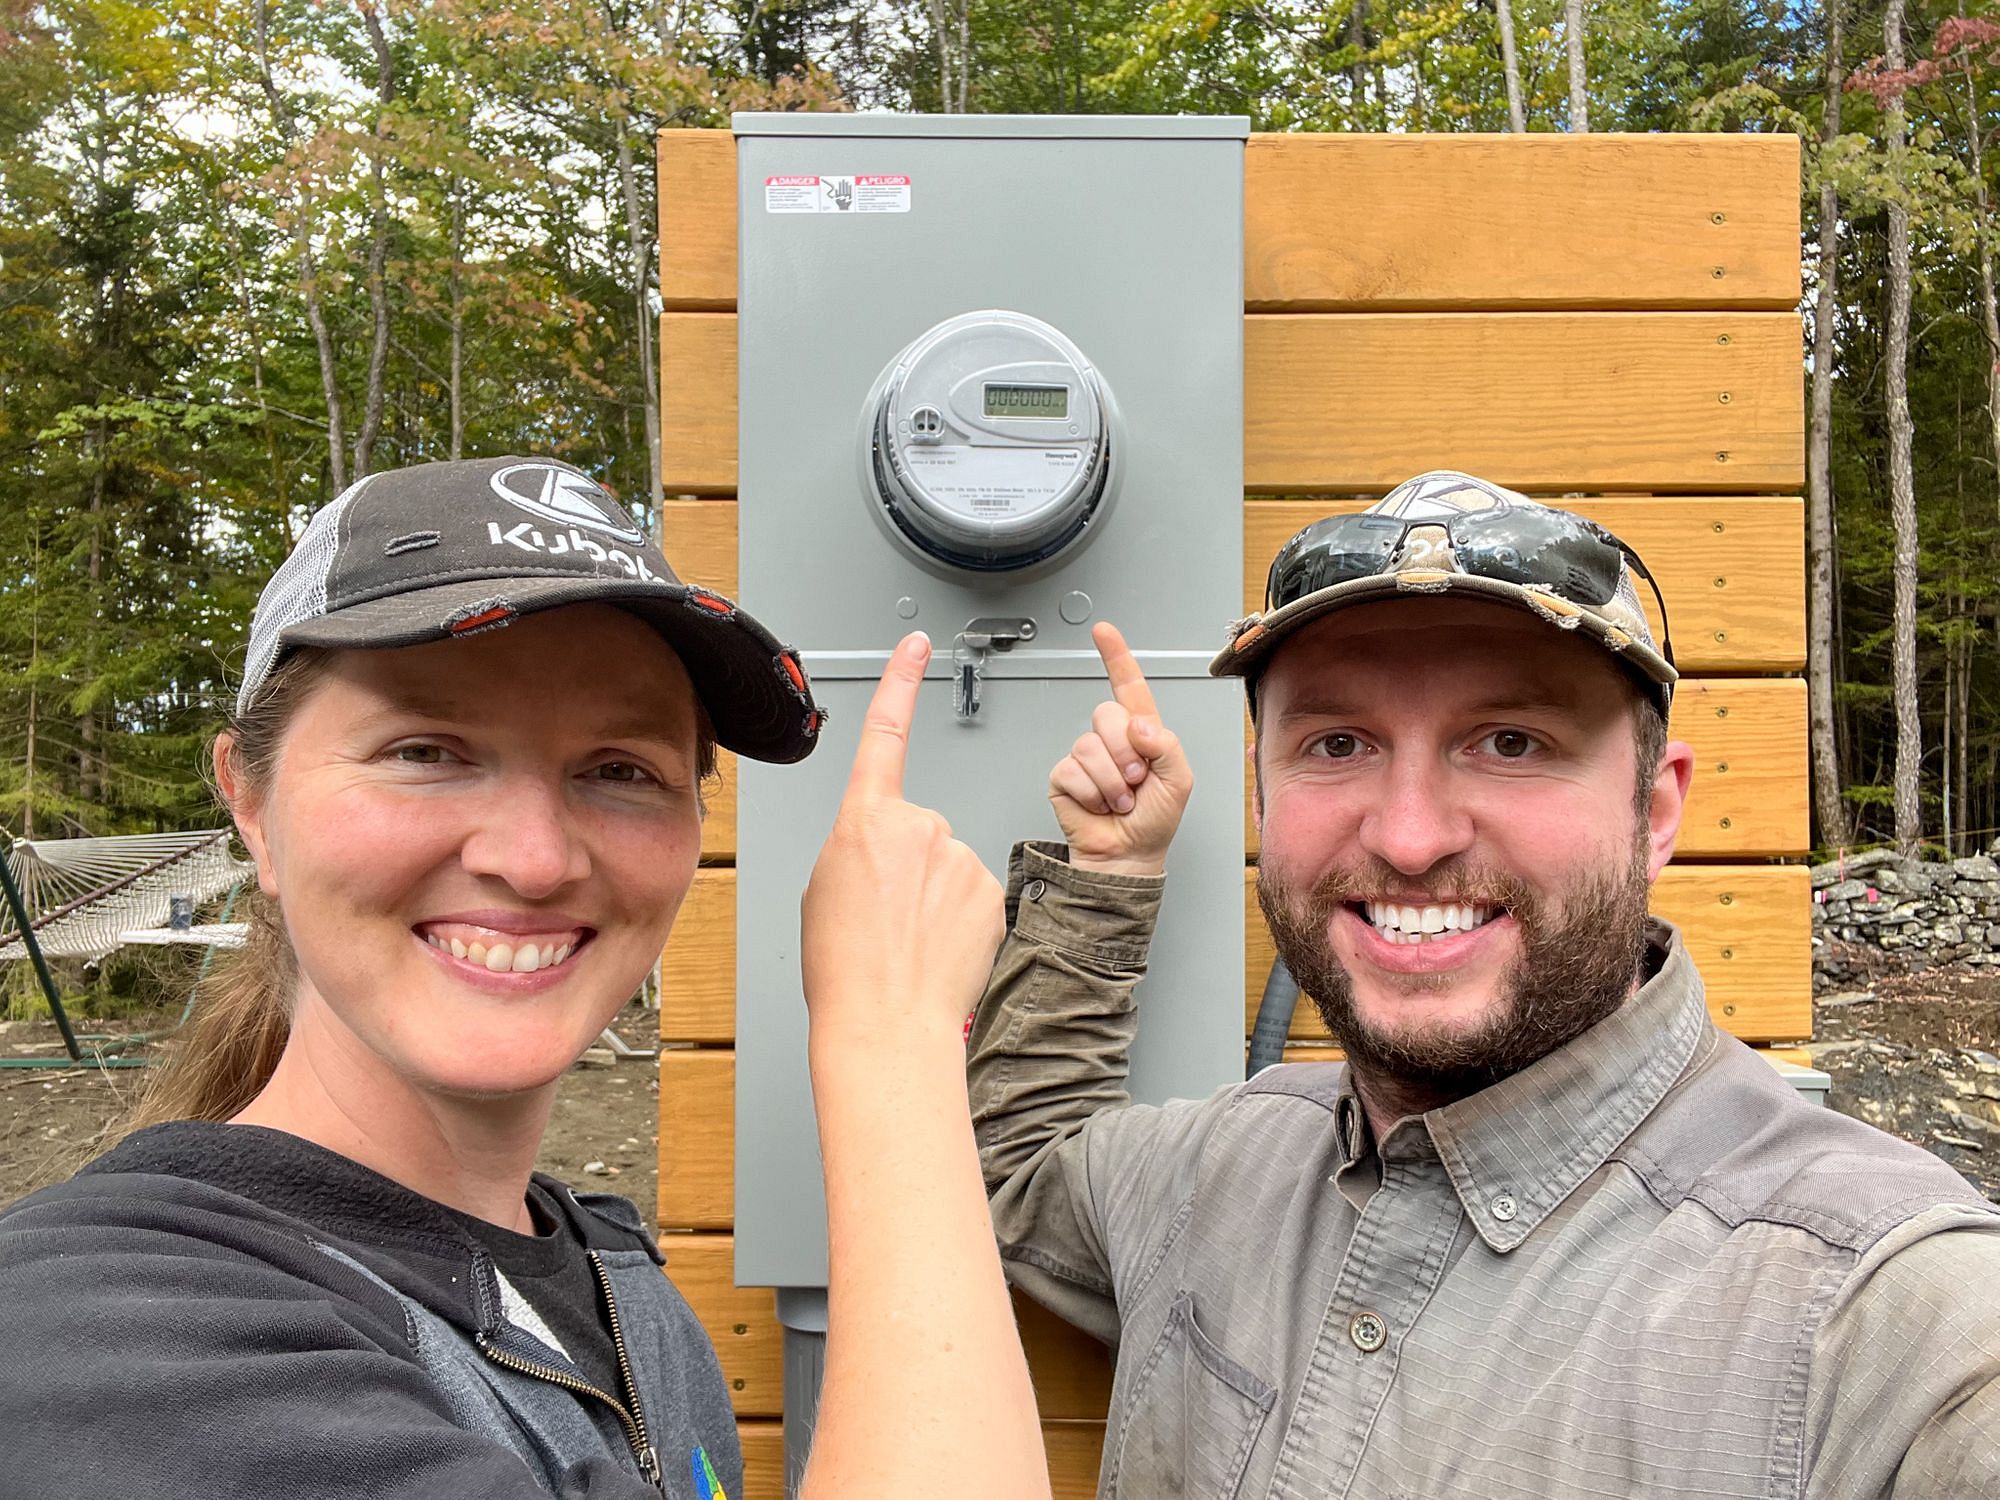 New Electric Meter Install